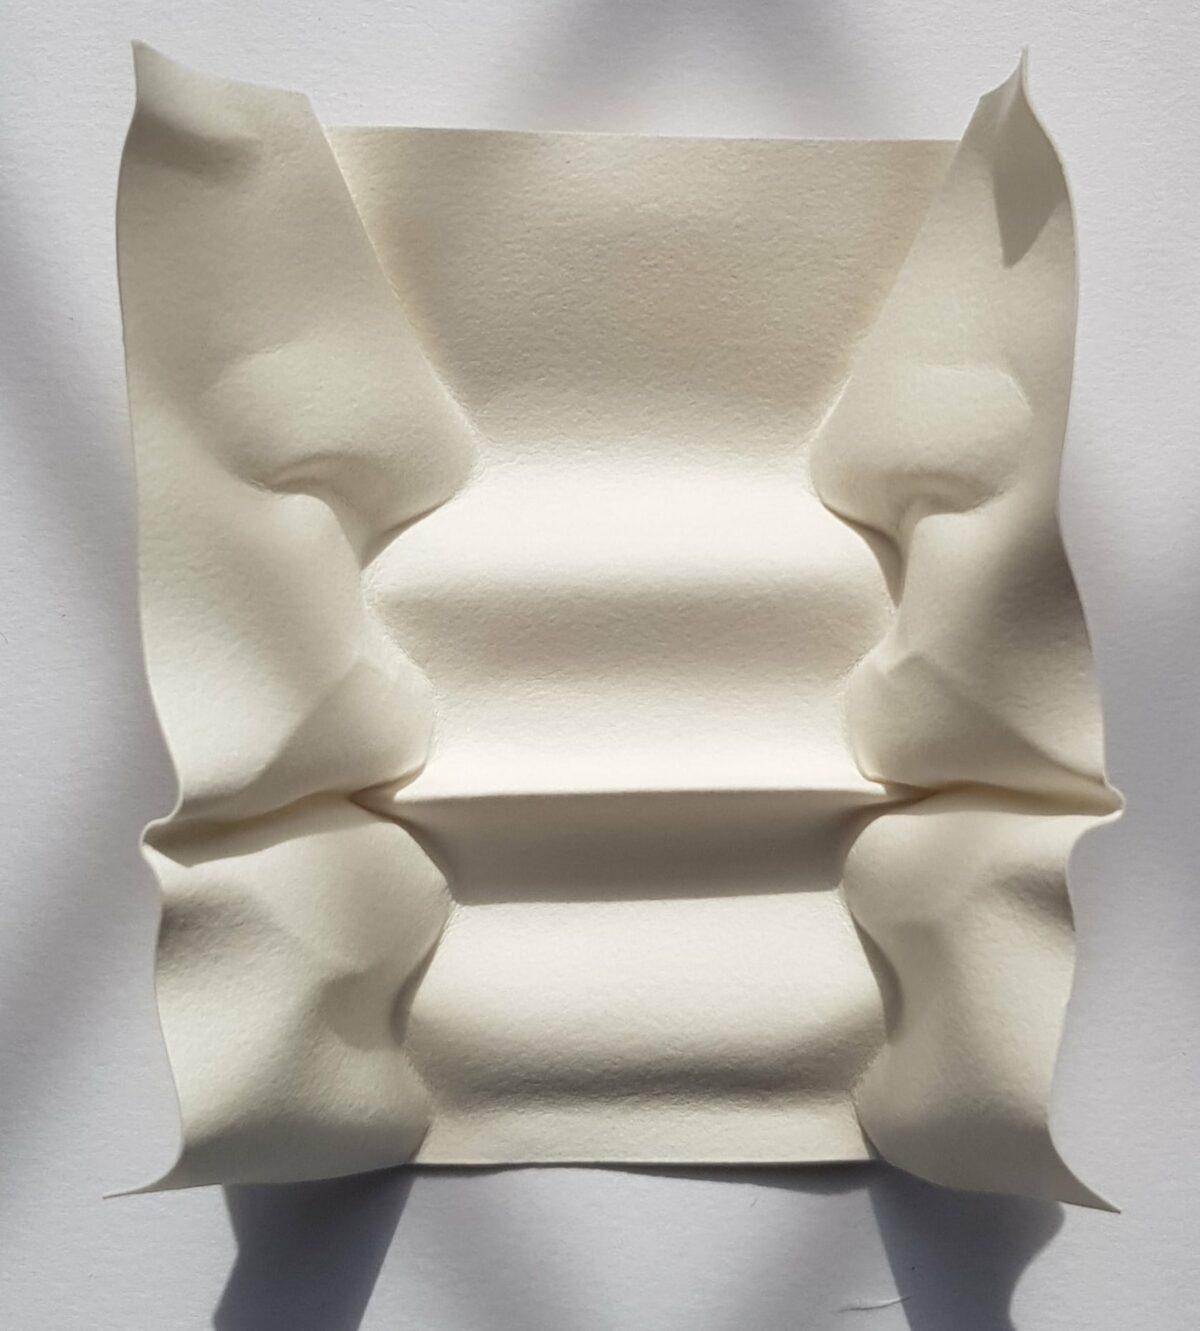 Fascinating Facial Sculptures Made From Folded Paper Sheets By Polly Verity (17)